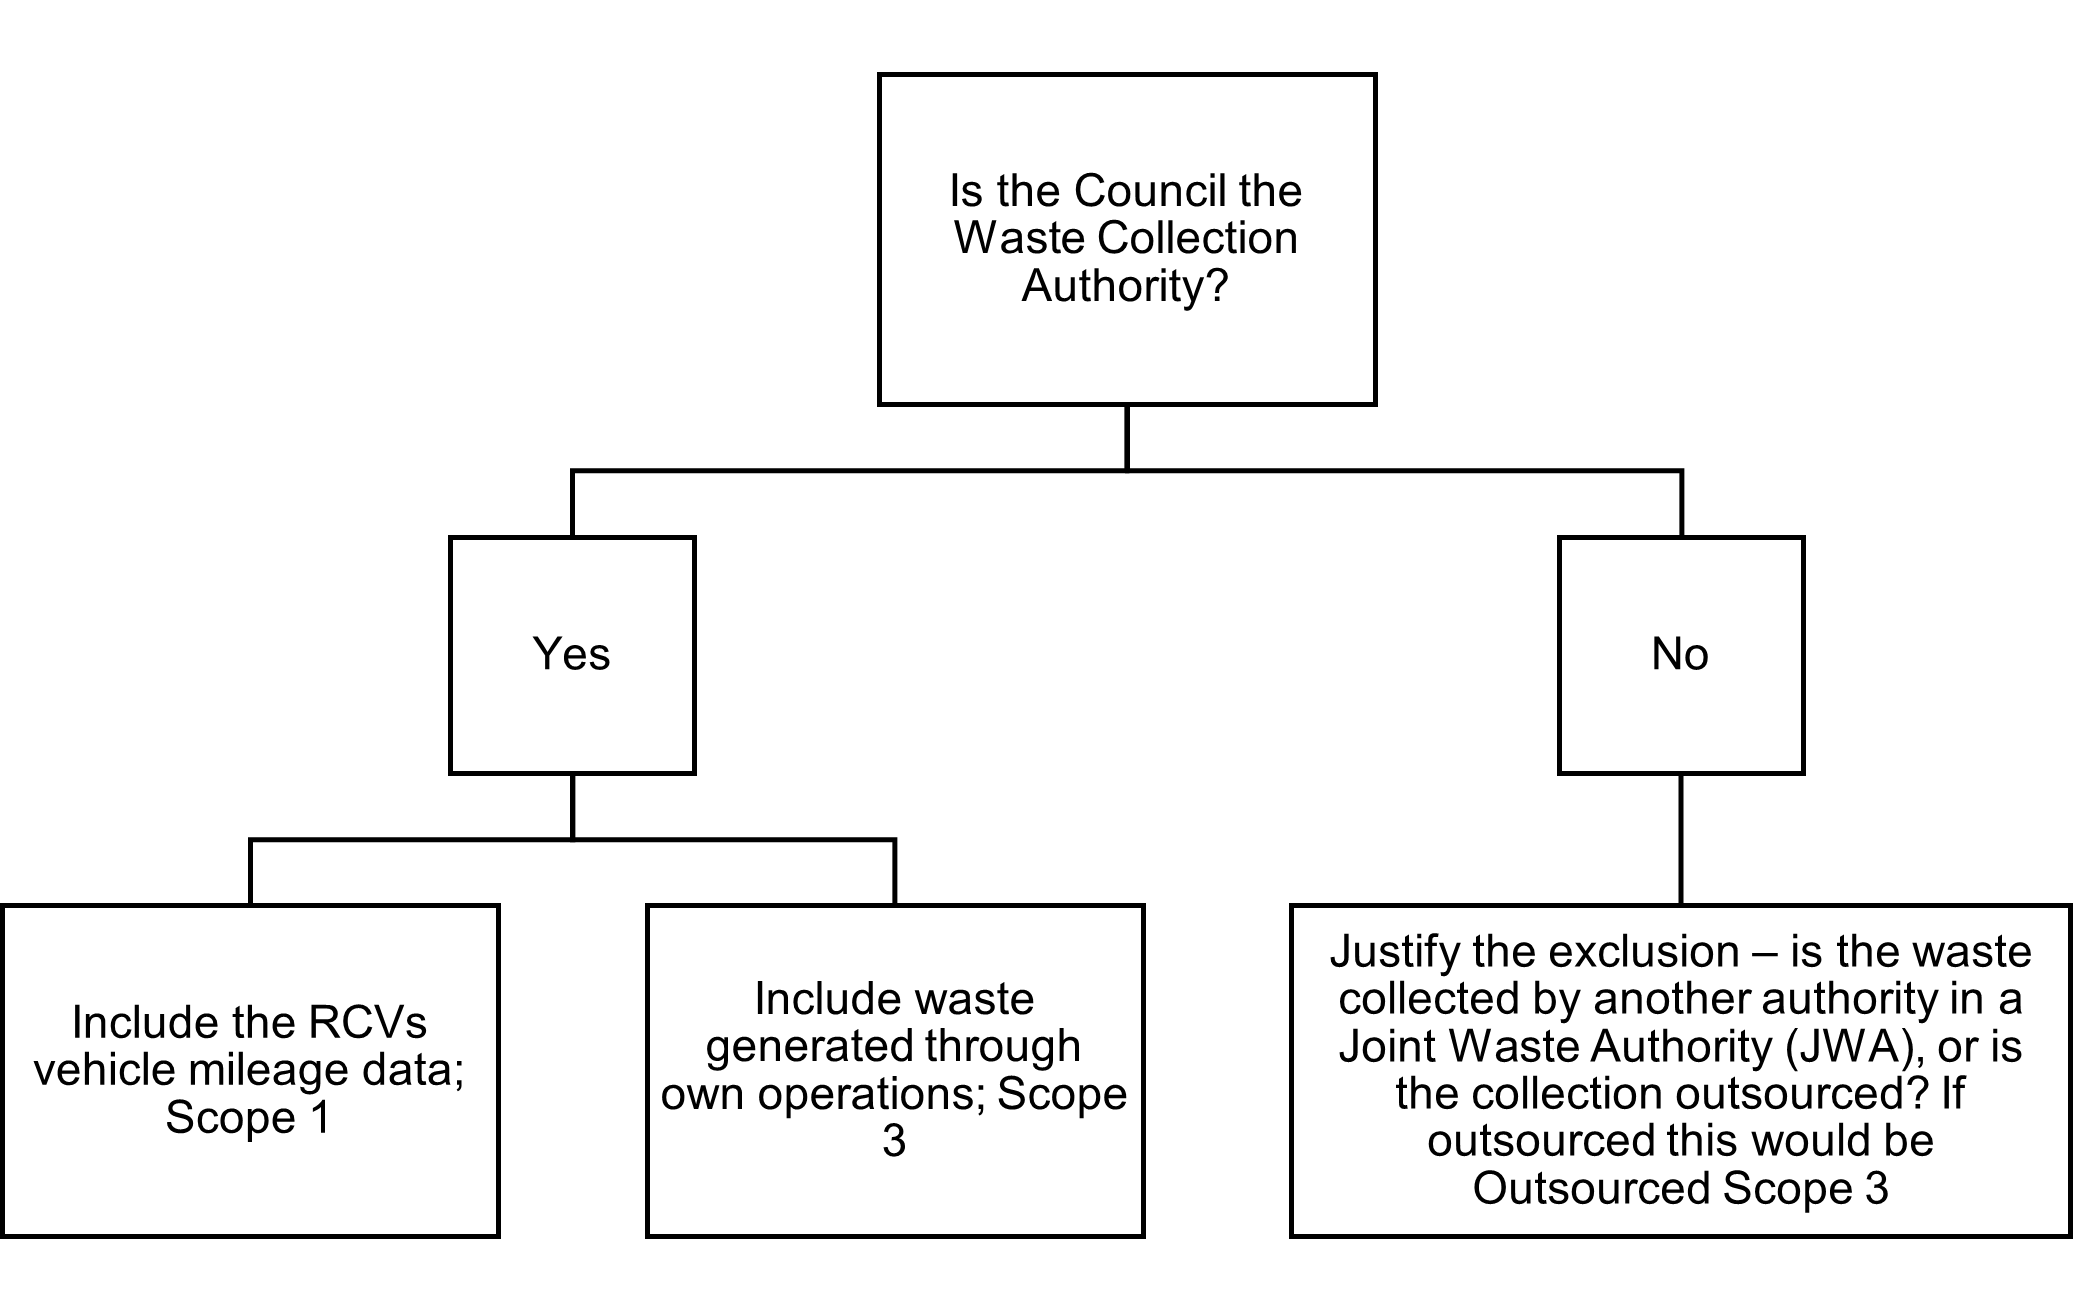 Figure 1: Decision tree for Waste Collection Authority